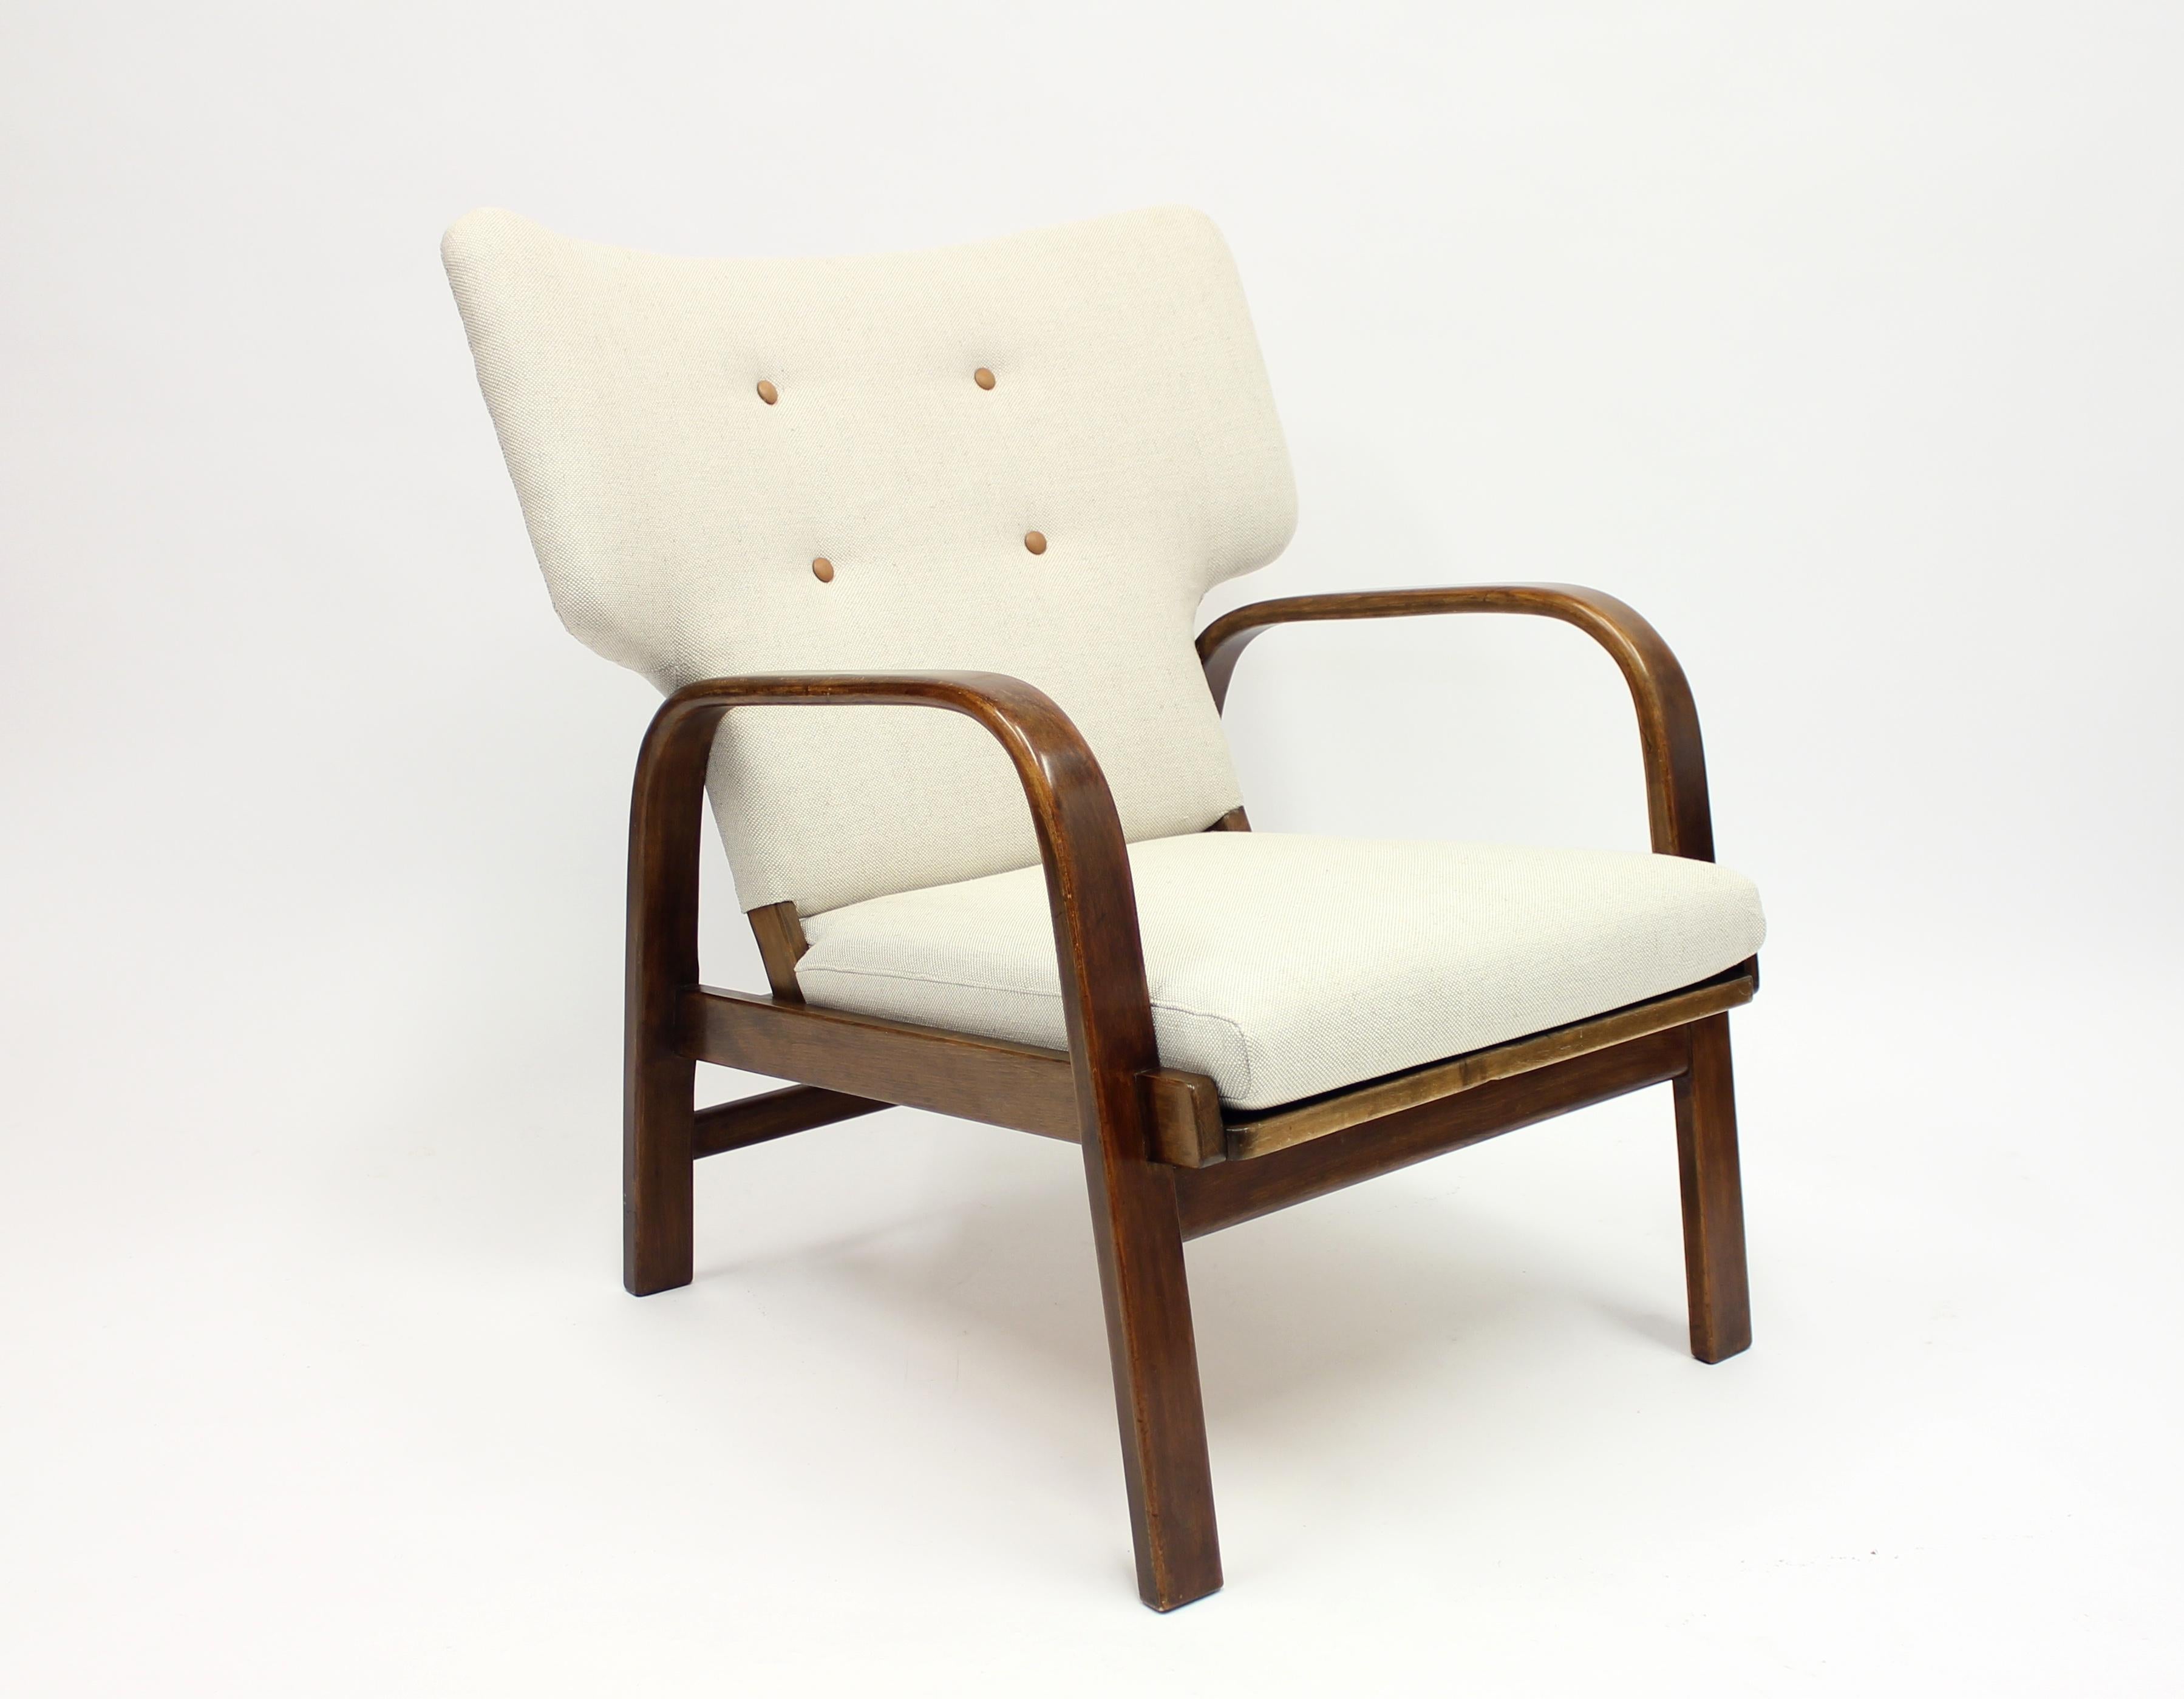 Danish easy chair designed by Magnus Stephensen with his almost trademark T-shaped form. Produced by legendary Danish manufacturer Fritz Hansen in the 1930s. Leg frame in stained beech with new off-white upholstery with brown leather buttons.